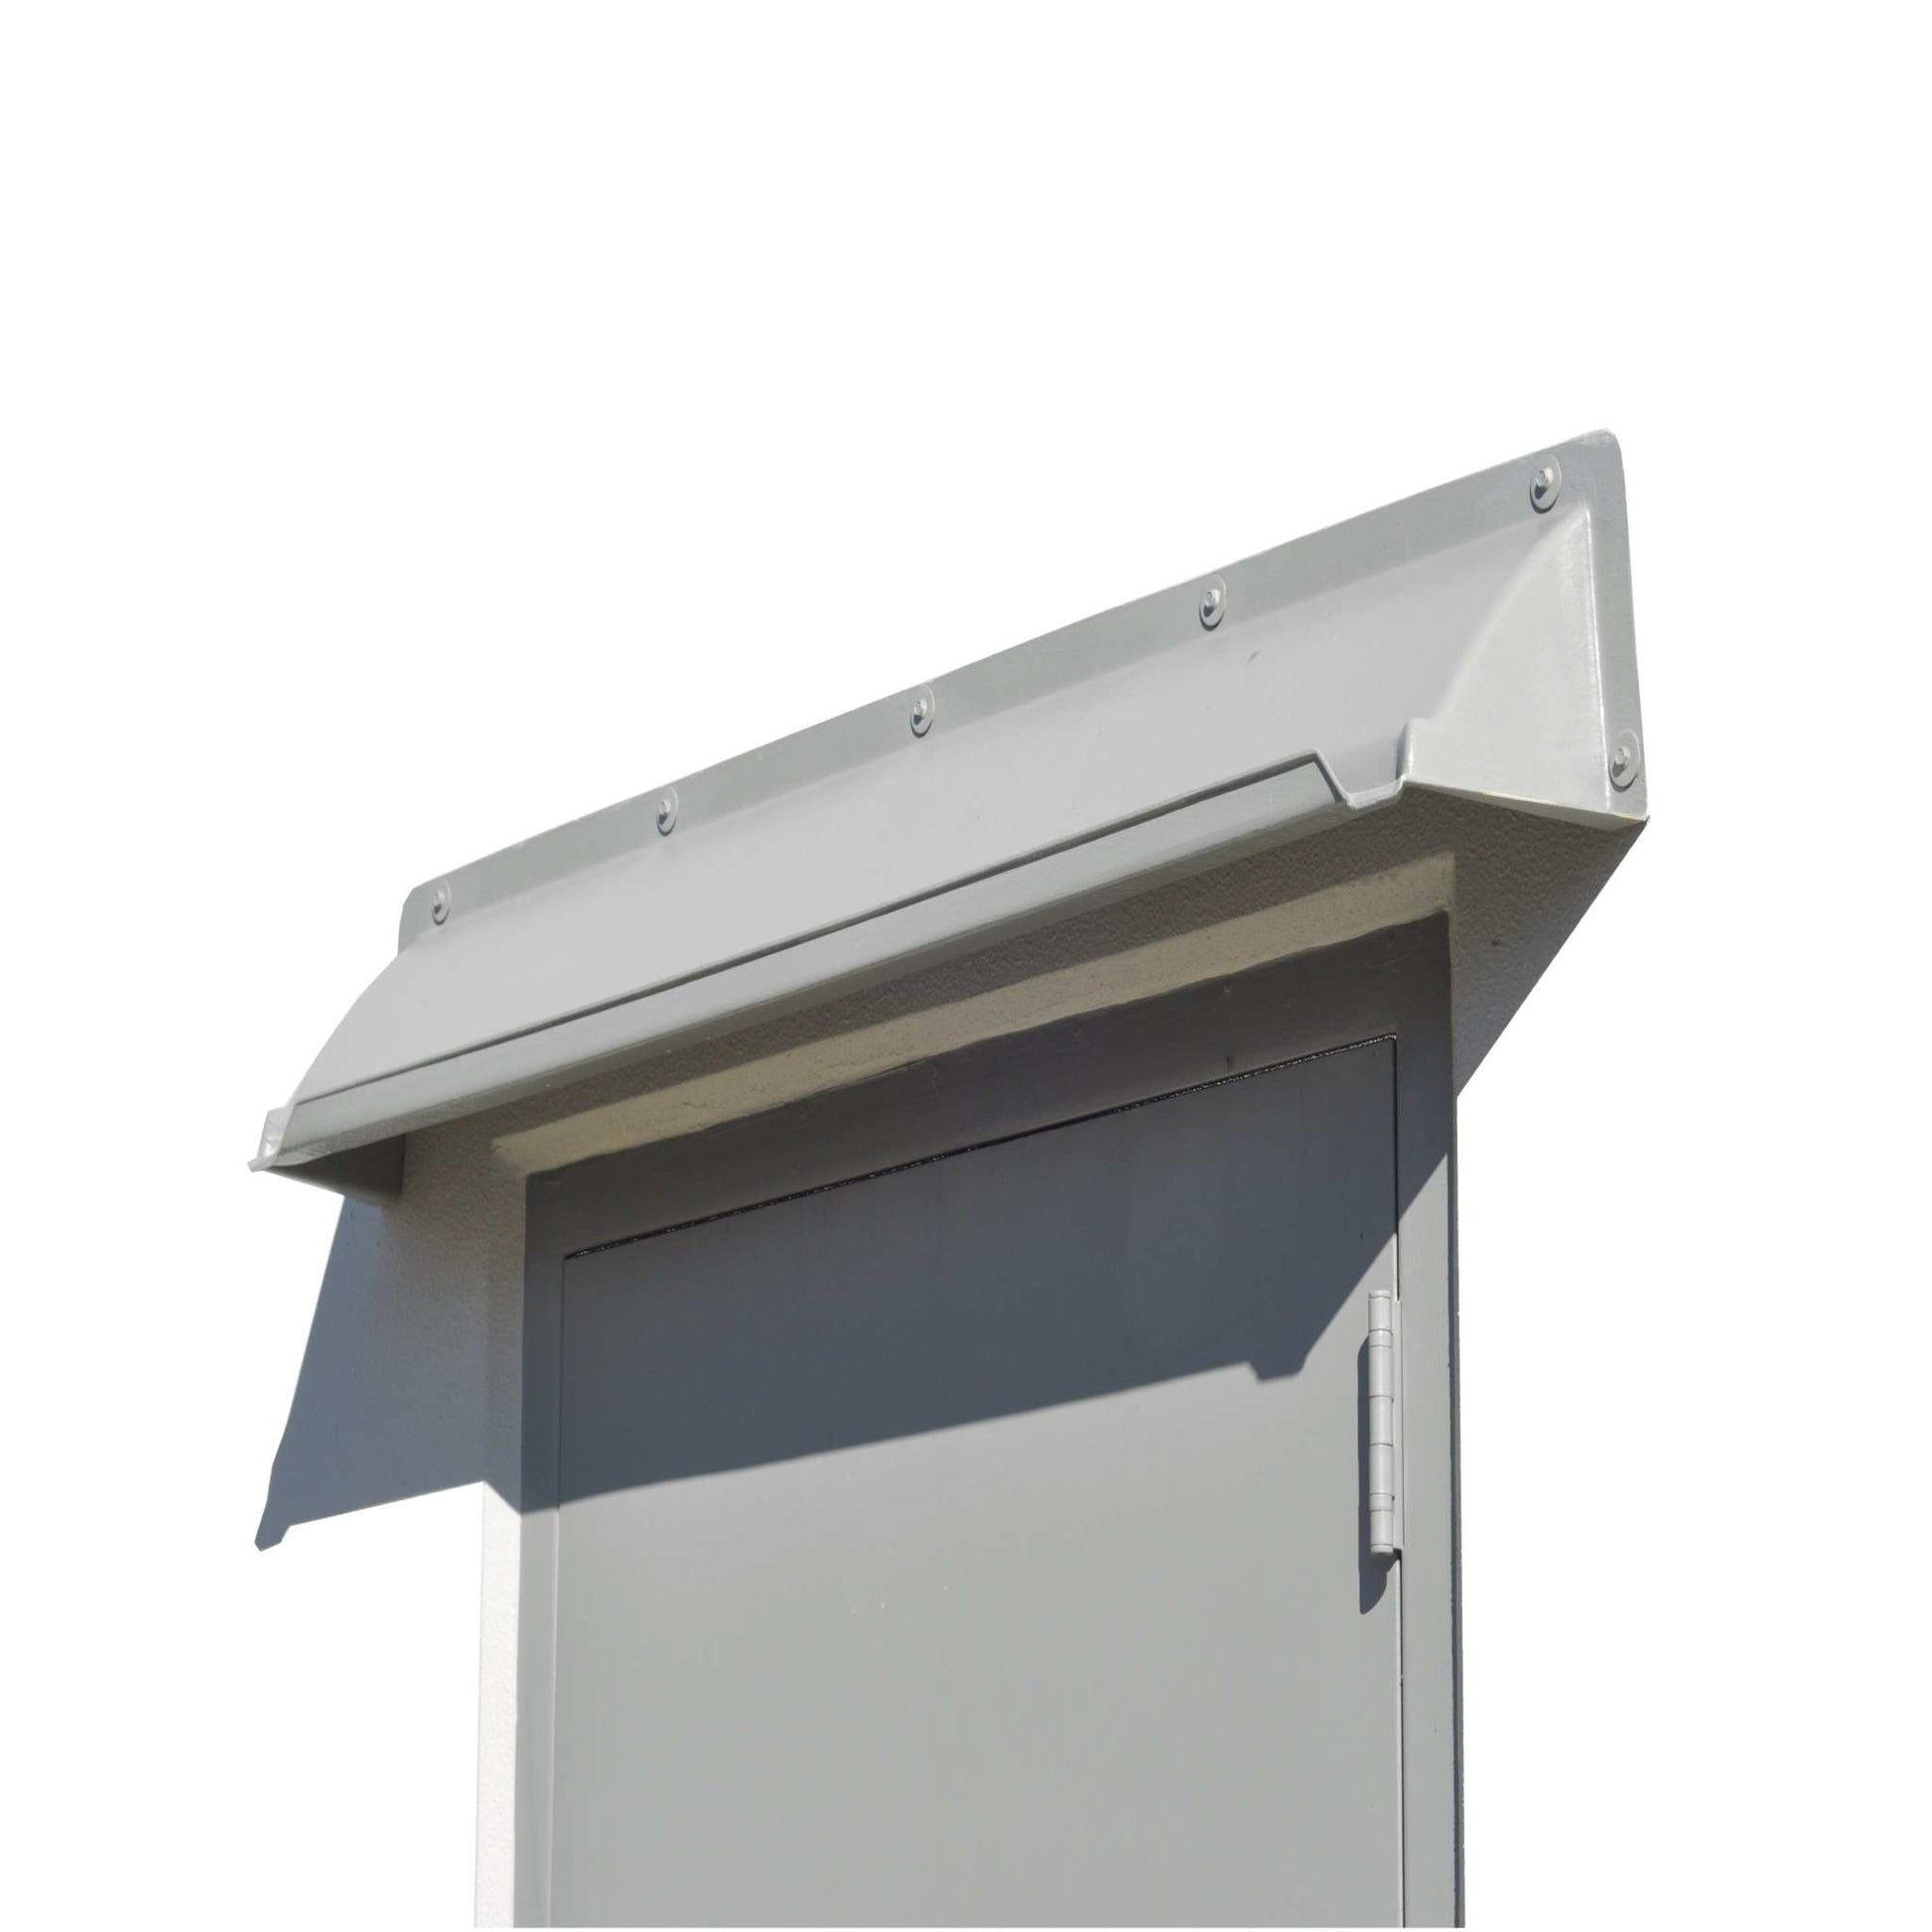 A gray rain diverter mounted above a gray hollow metal door in a white building.